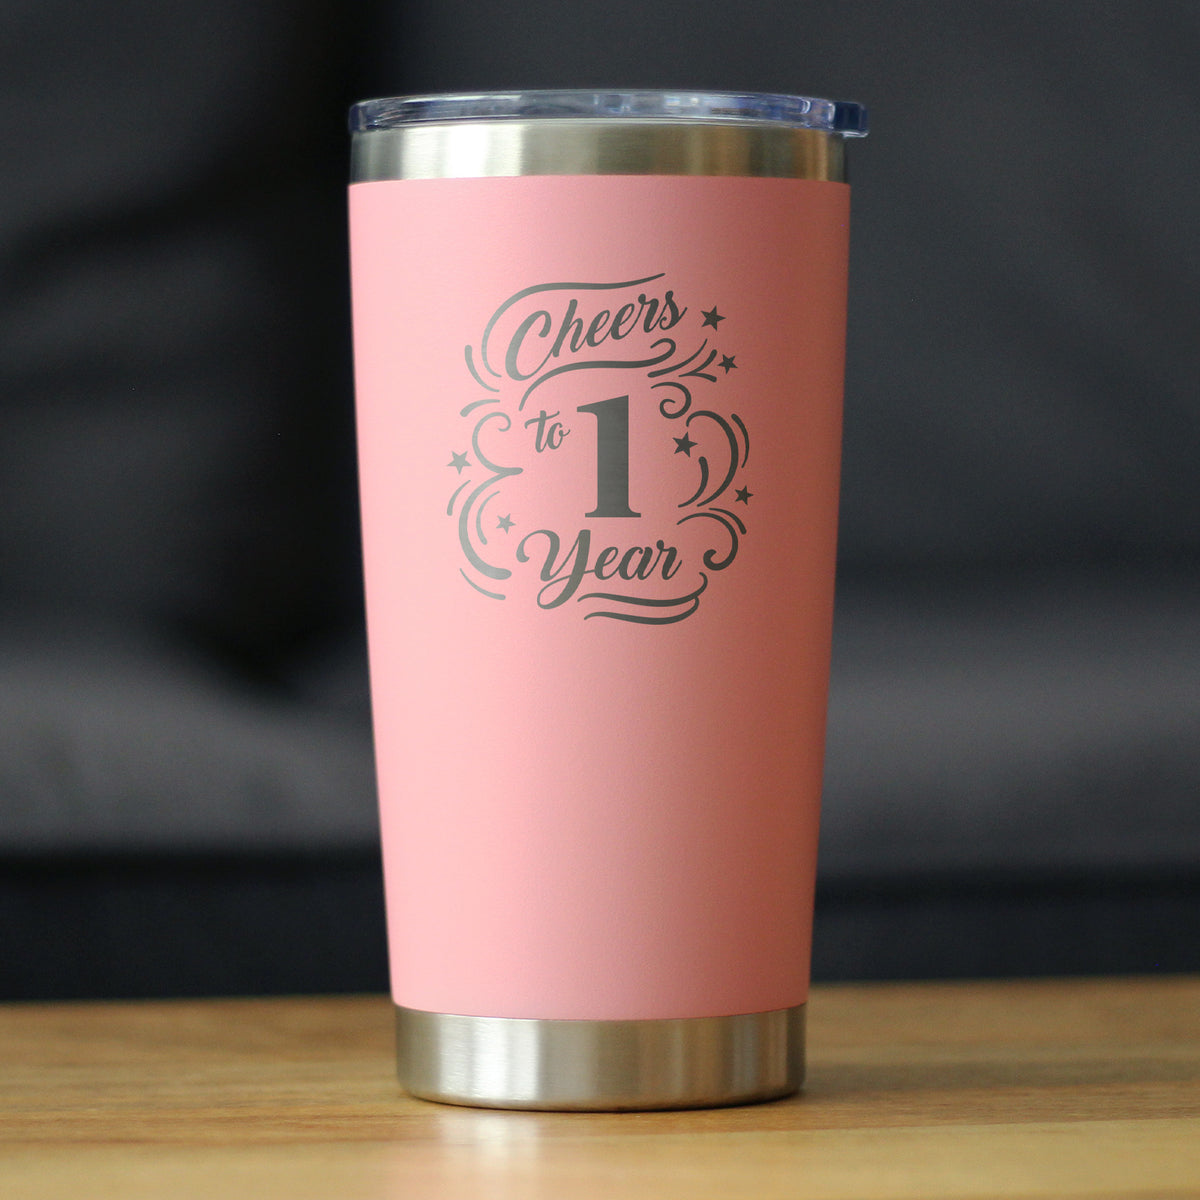 Cheers to 1 Year - Insulated Coffee Tumbler Cup with Sliding Lid - Stainless Steel Insulated Mug - 1st Anniversary Gifts and Party Decor